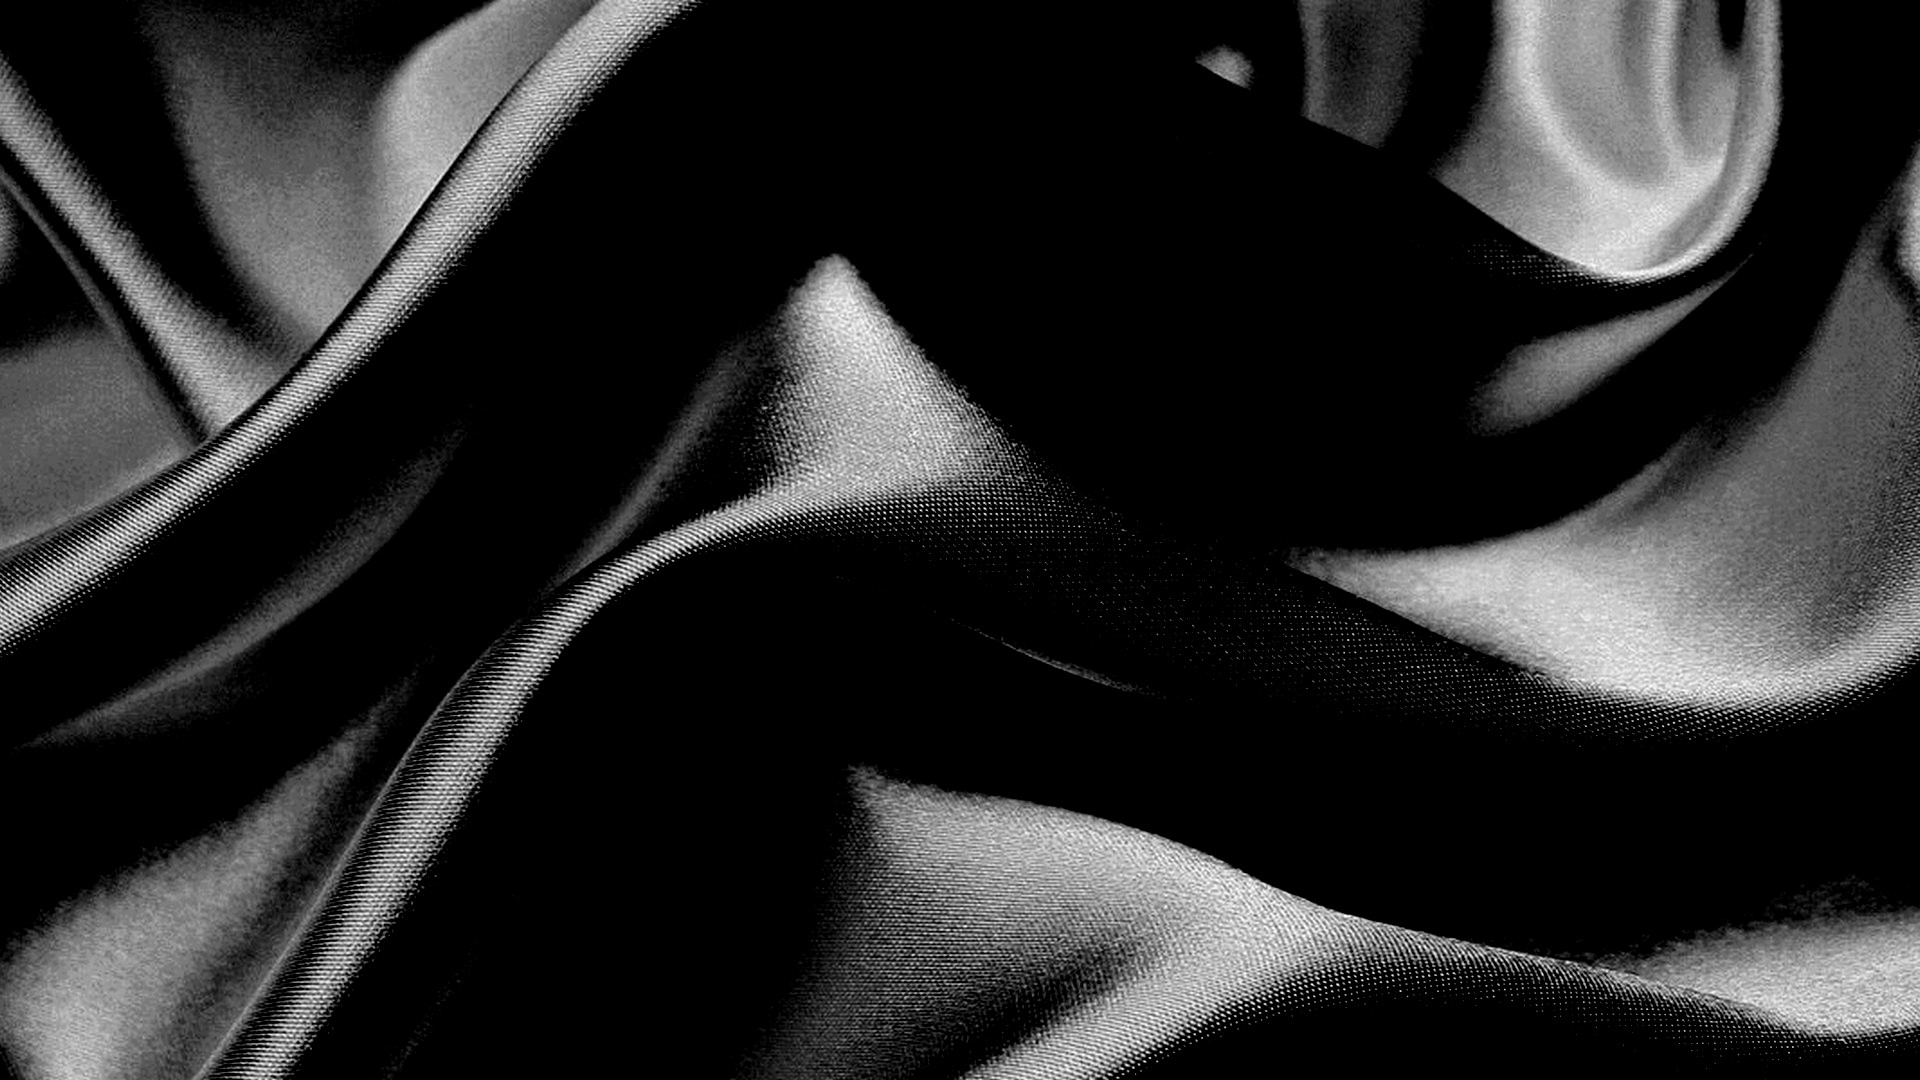 Black Silk iPhone Wallpaper with high-resolution 1920x1080 pixel. You can use this wallpaper for your iPhone 5, 6, 7, 8, X, XS, XR backgrounds, Mobile Screensaver, or iPad Lock Screen